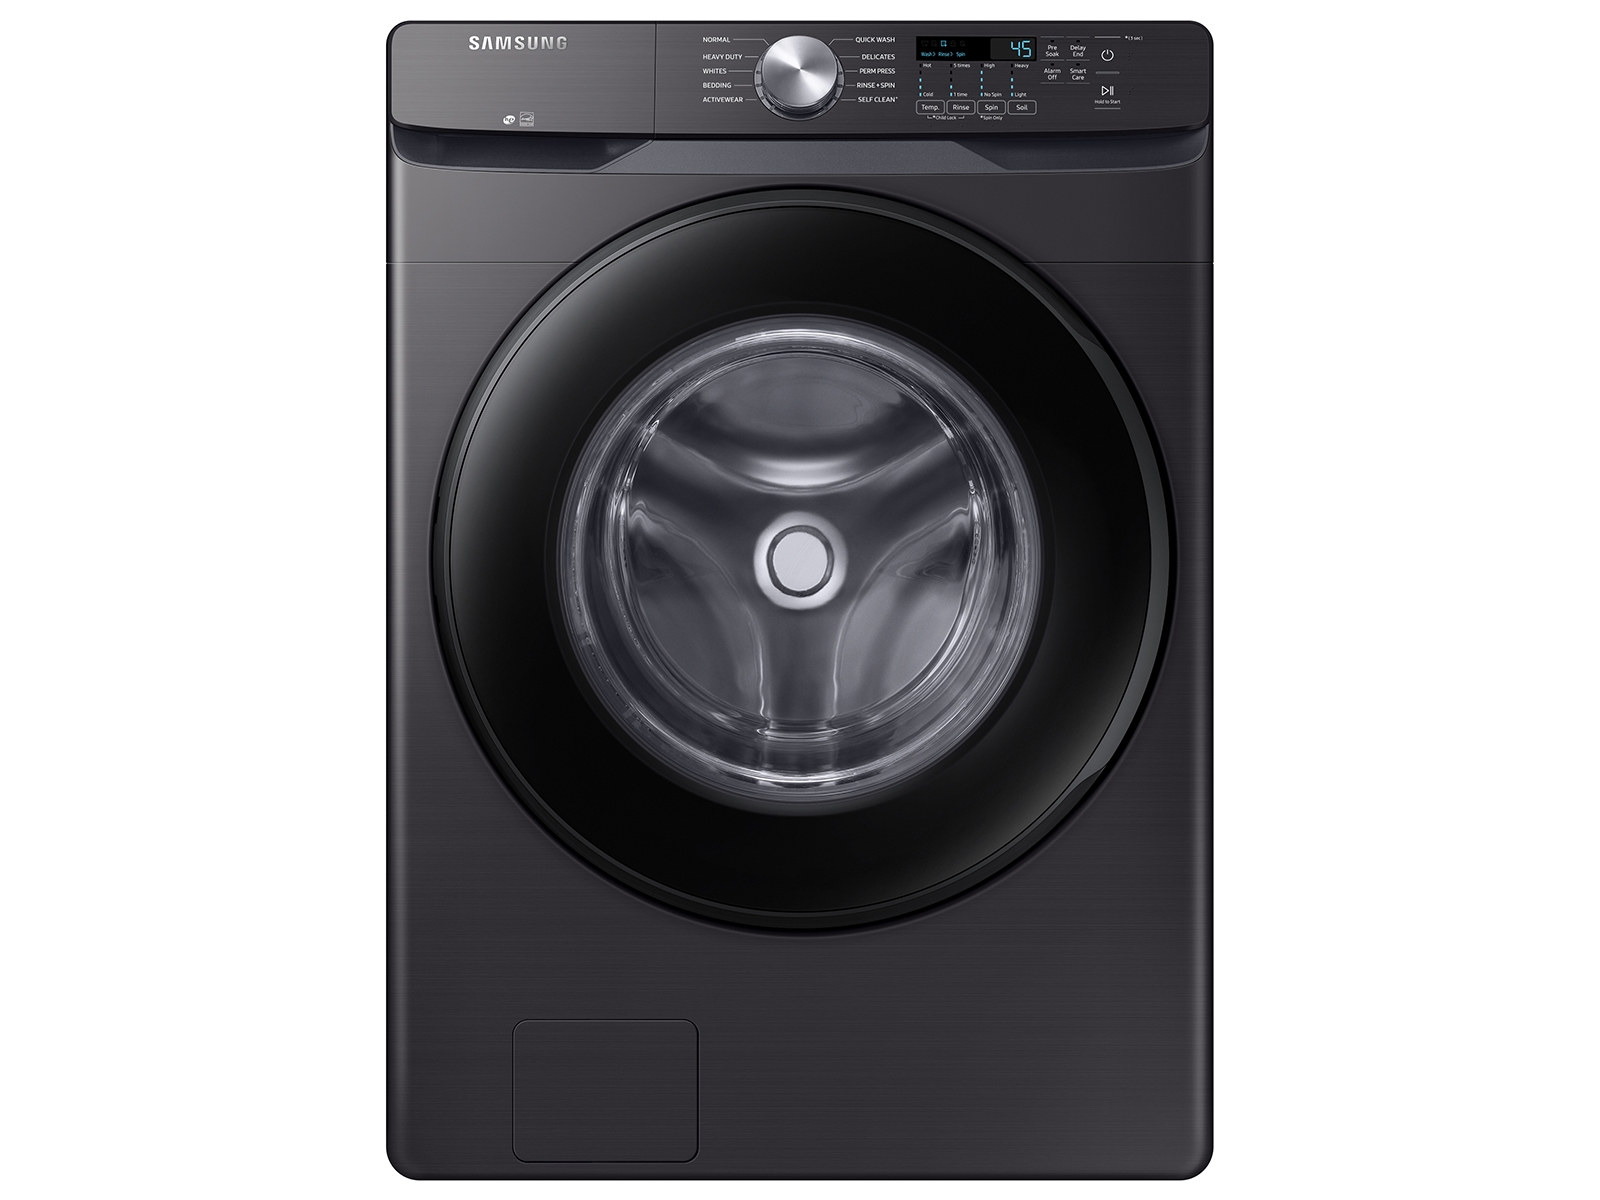 Samsung Washer and Dryer Pairs Laundry Appliances -  WF45T6000A-DVE45T6000-WE402N